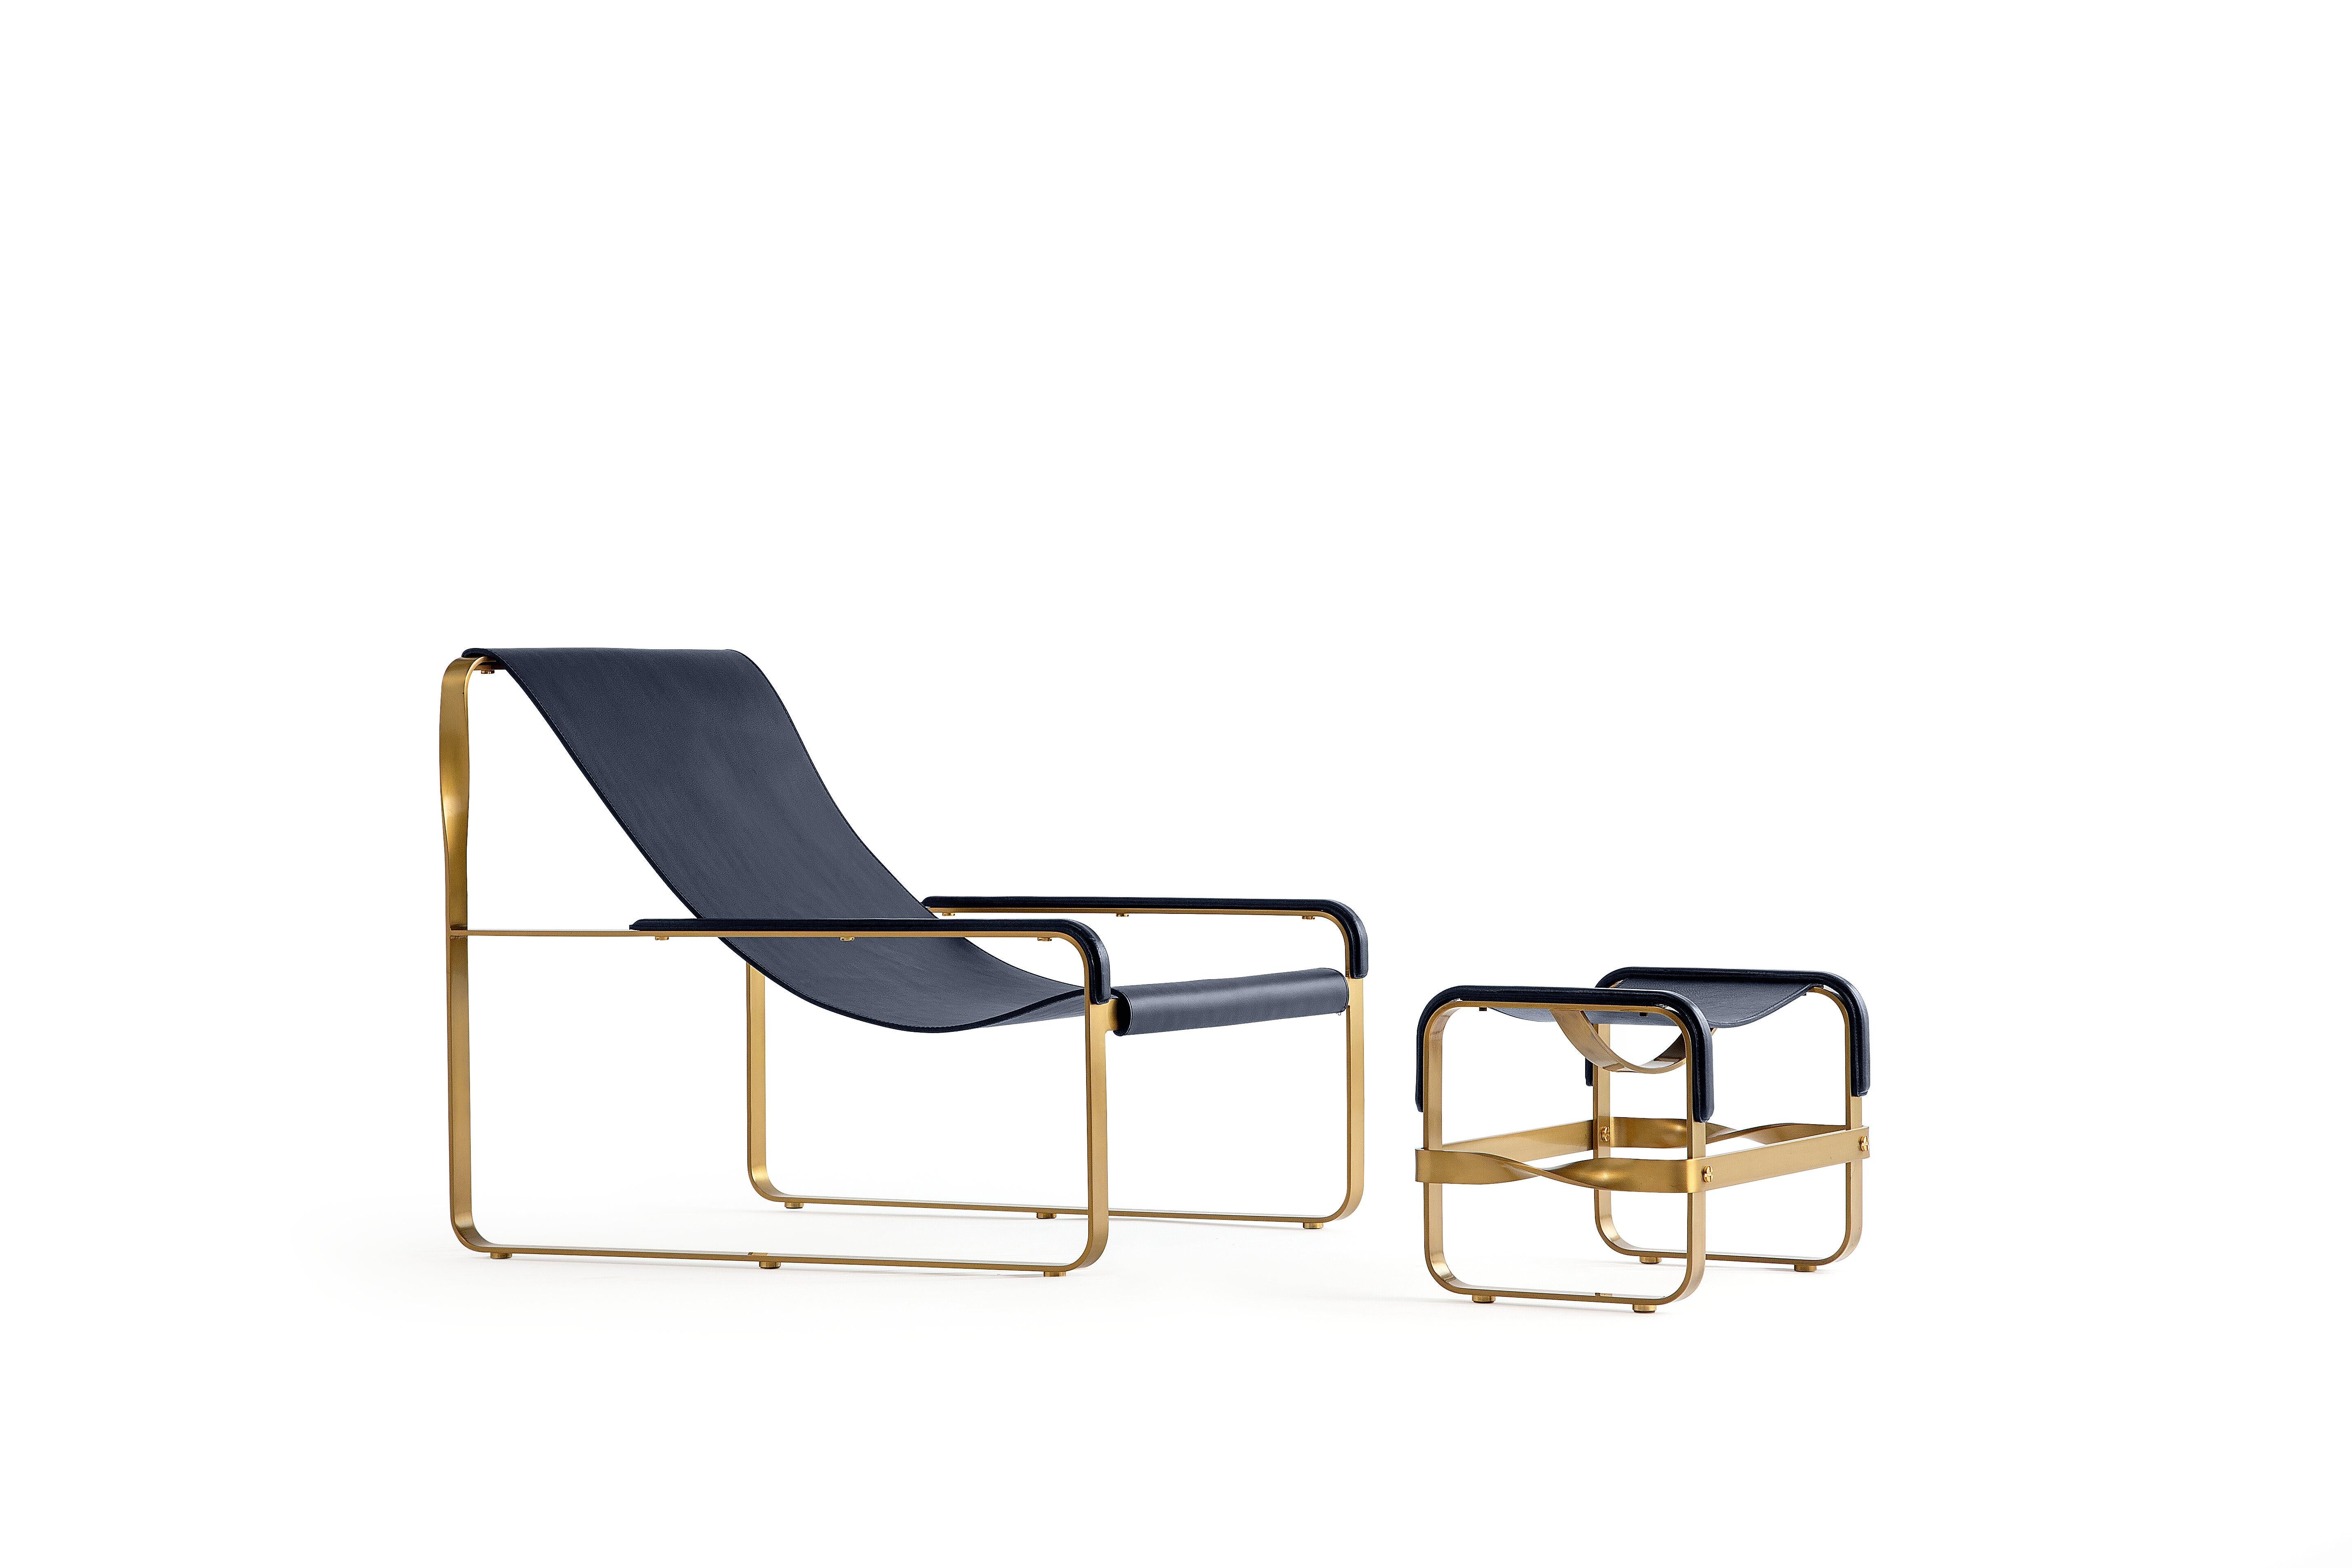 Classic Contemporary Chaise Lounge Aged Brass Steel & Navy Blue Leather Sample In Good Condition For Sale In Alcoy, Alicante